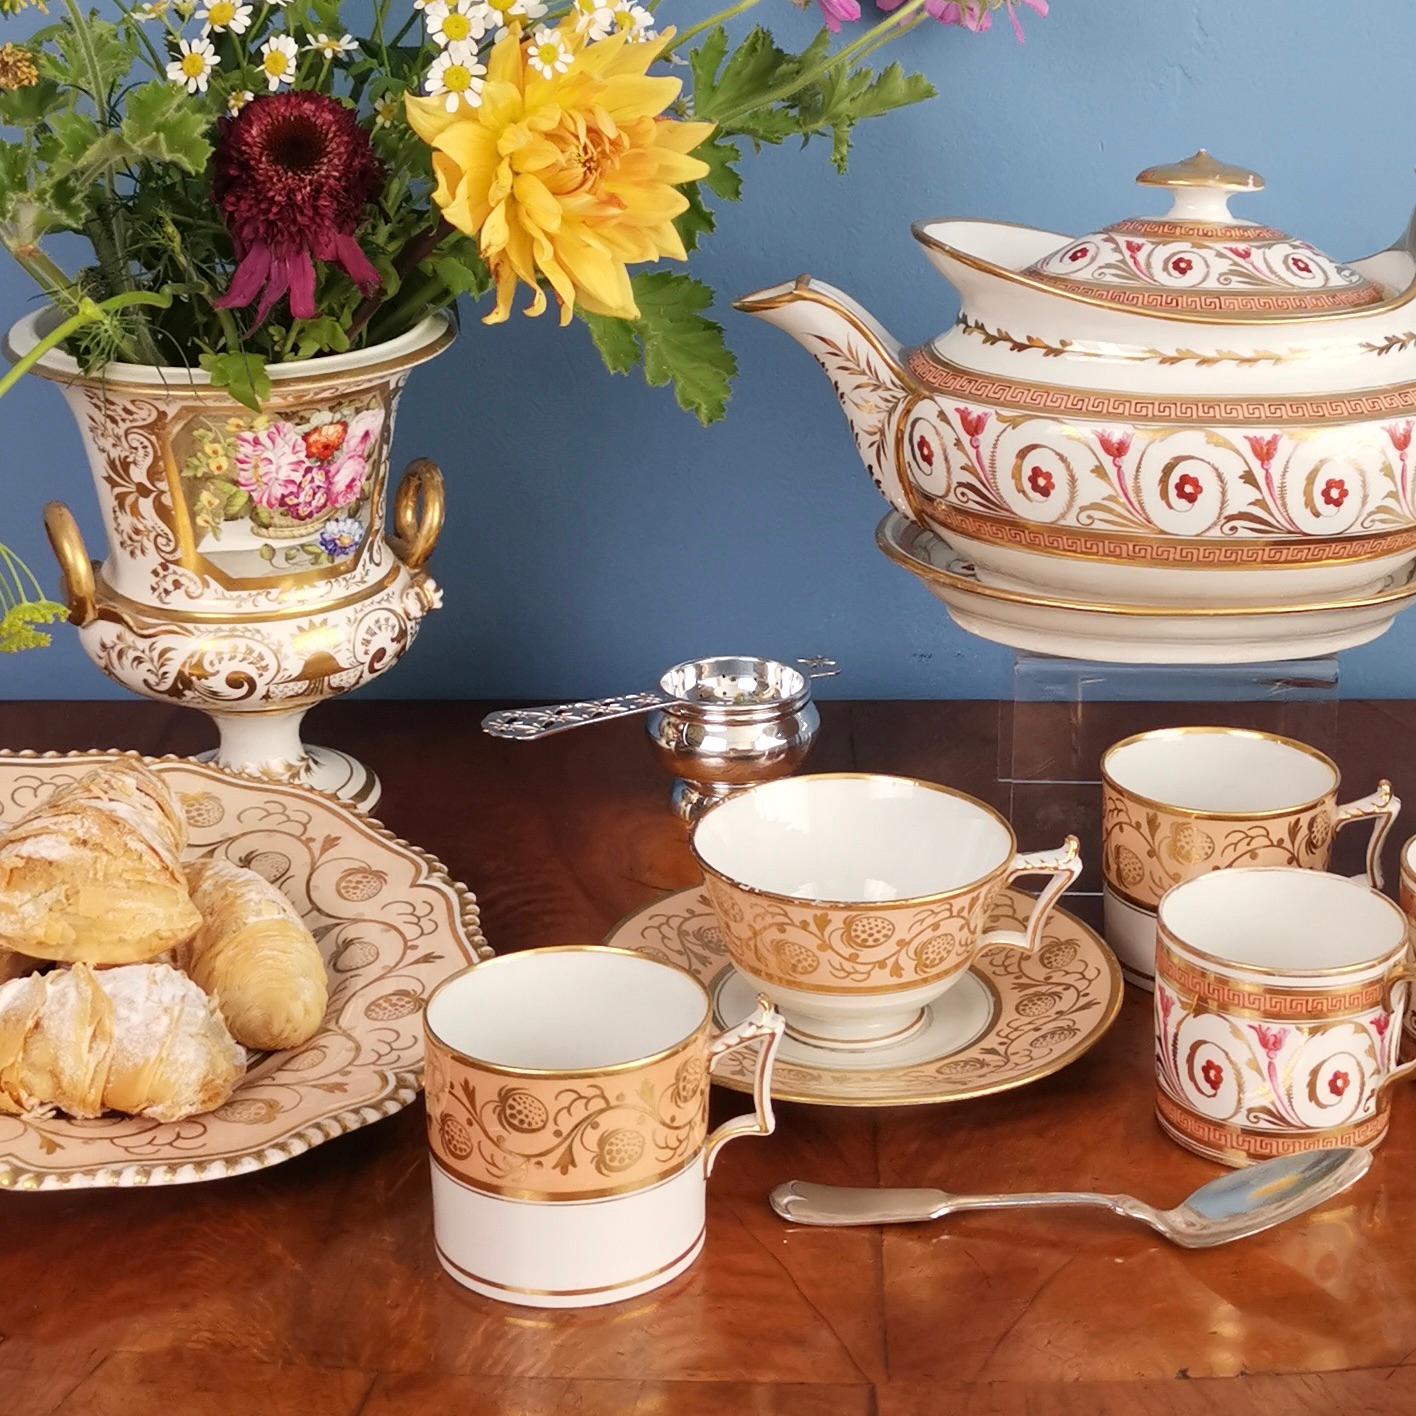 This is a beautiful coffee can and saucer made by Flight, Barr & Barr between 1813 and 1840, but most probably, circa 1815. It has a peach ground with a very charming gilt strawberry pattern.

Flight, Barr & Barr was the continuation of the famous